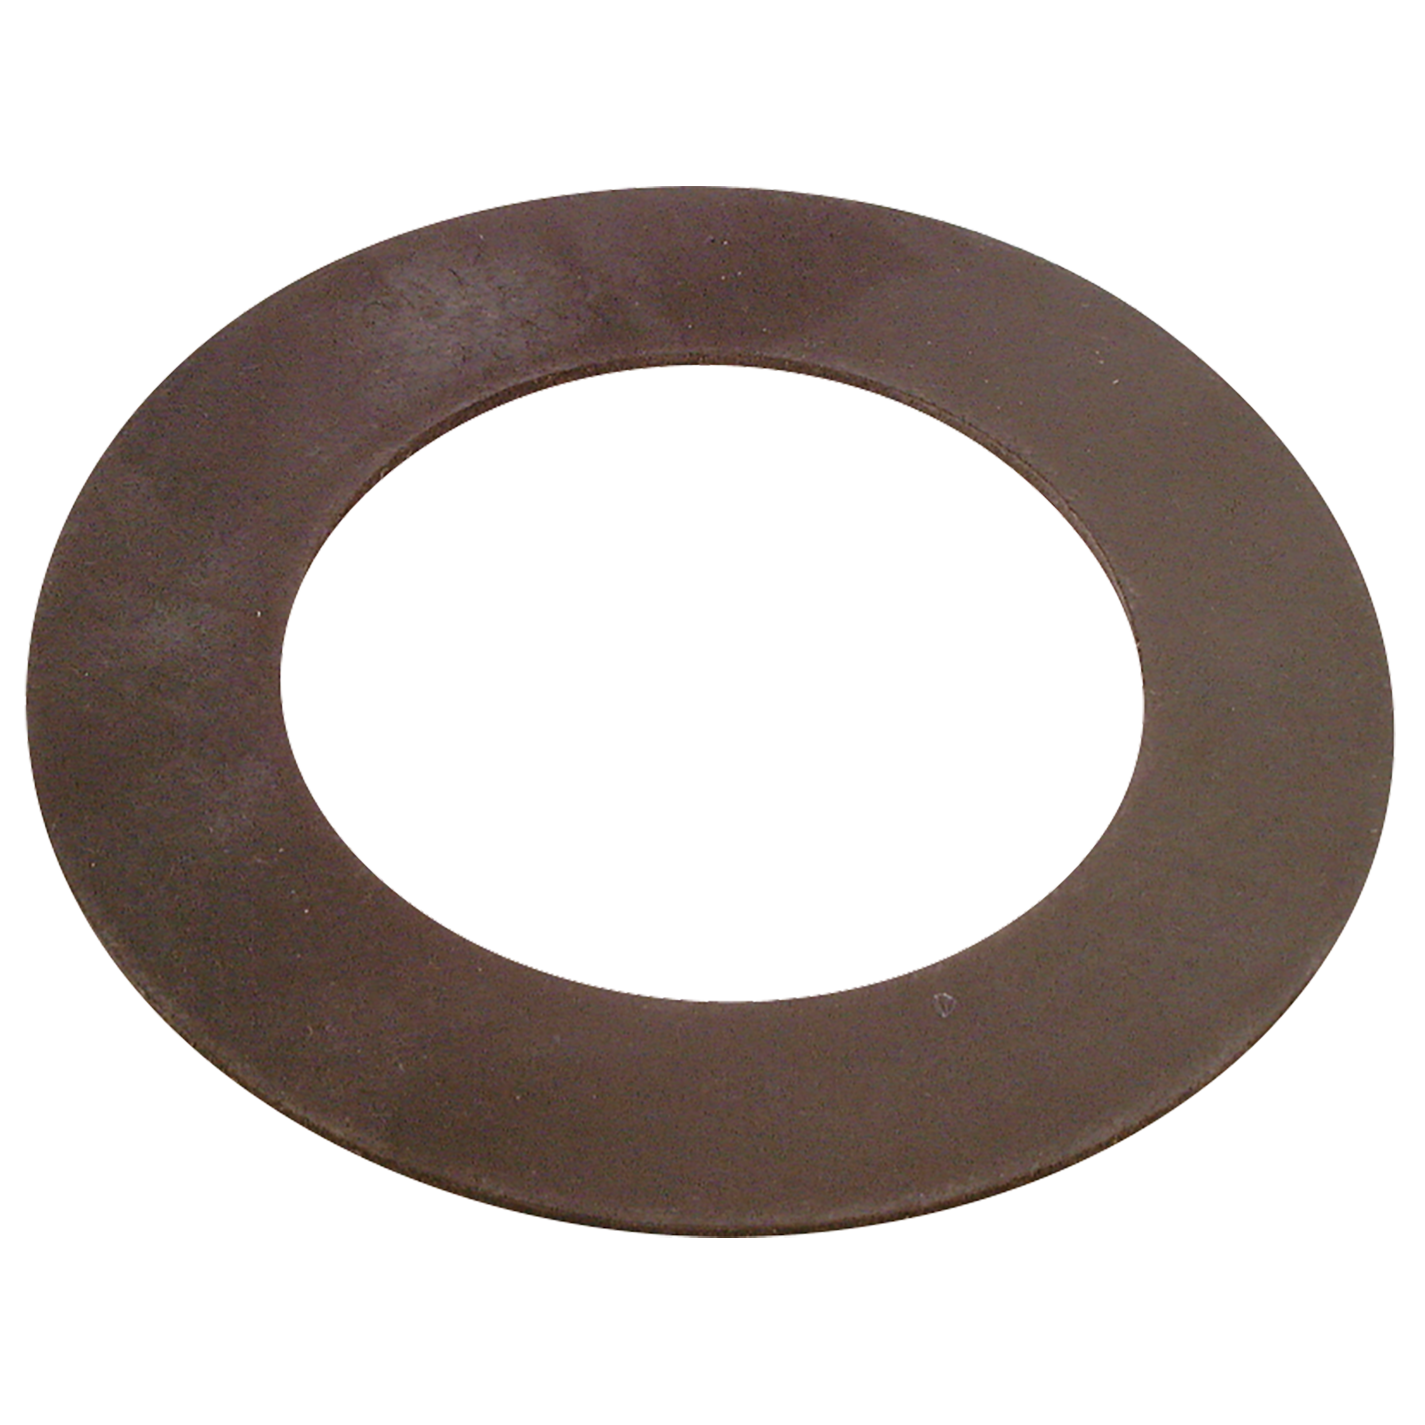 GASKET RUBBER IBC NP16 2"